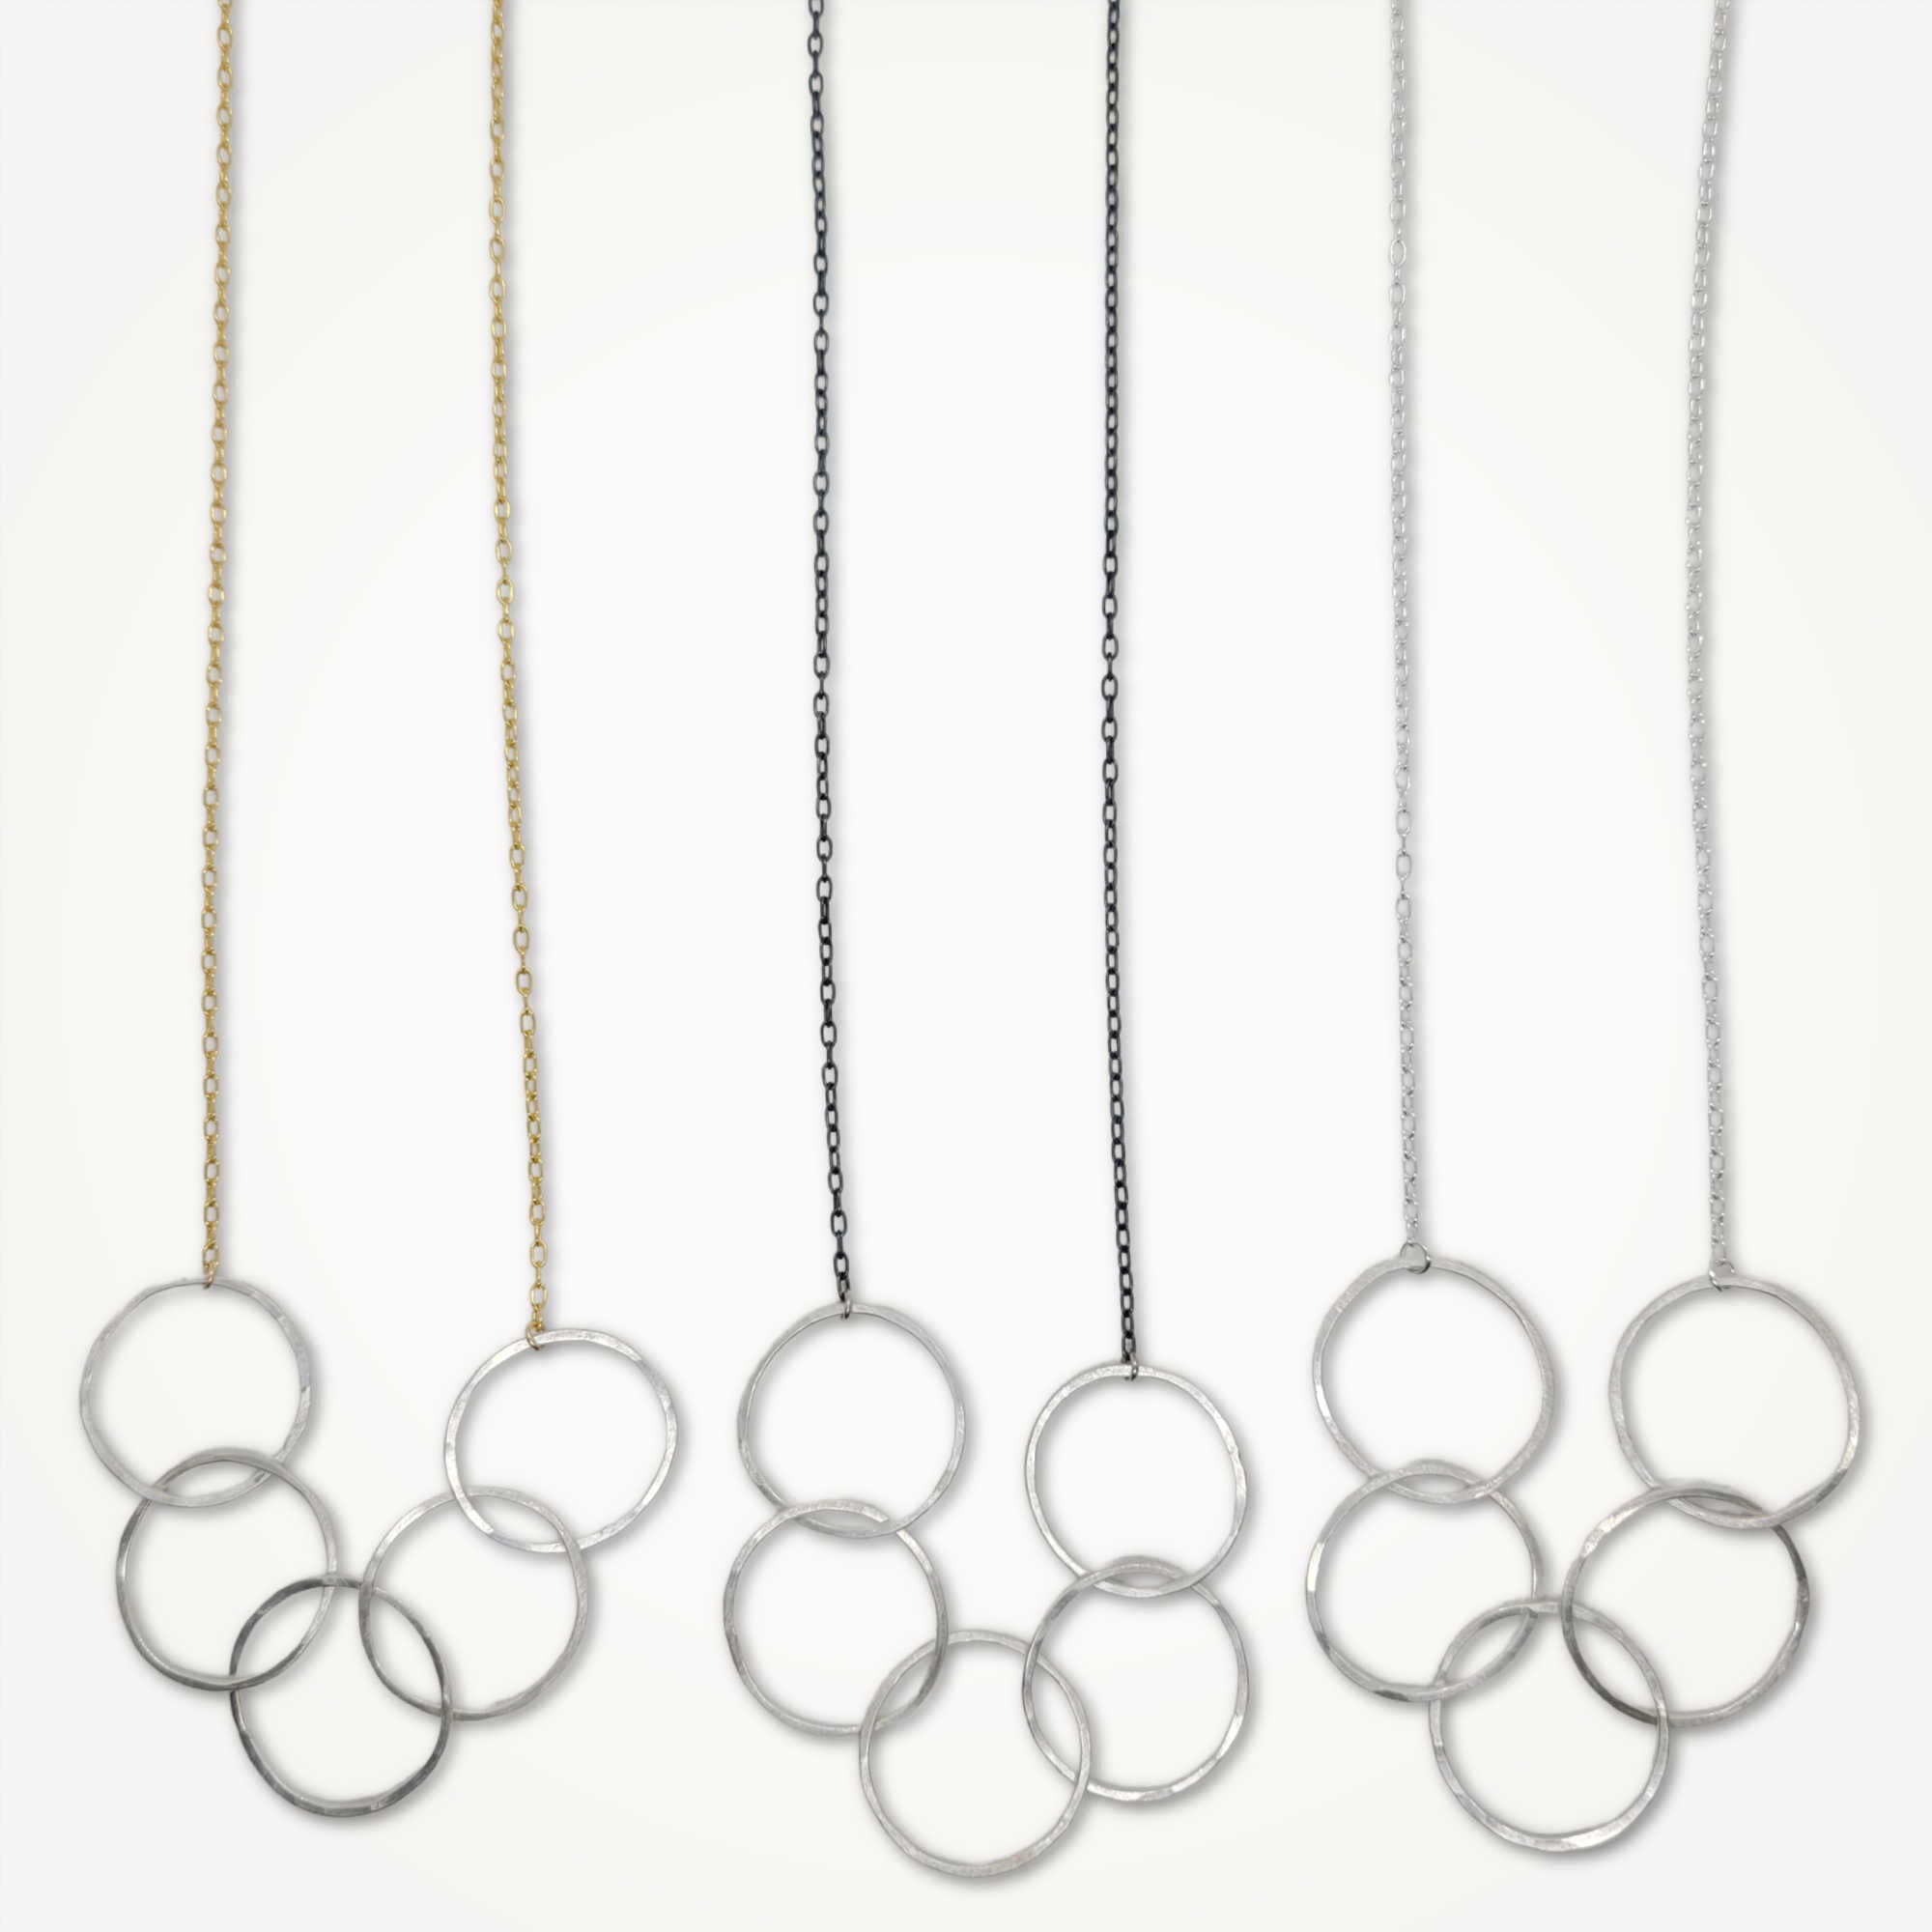 Five Moons Necklace